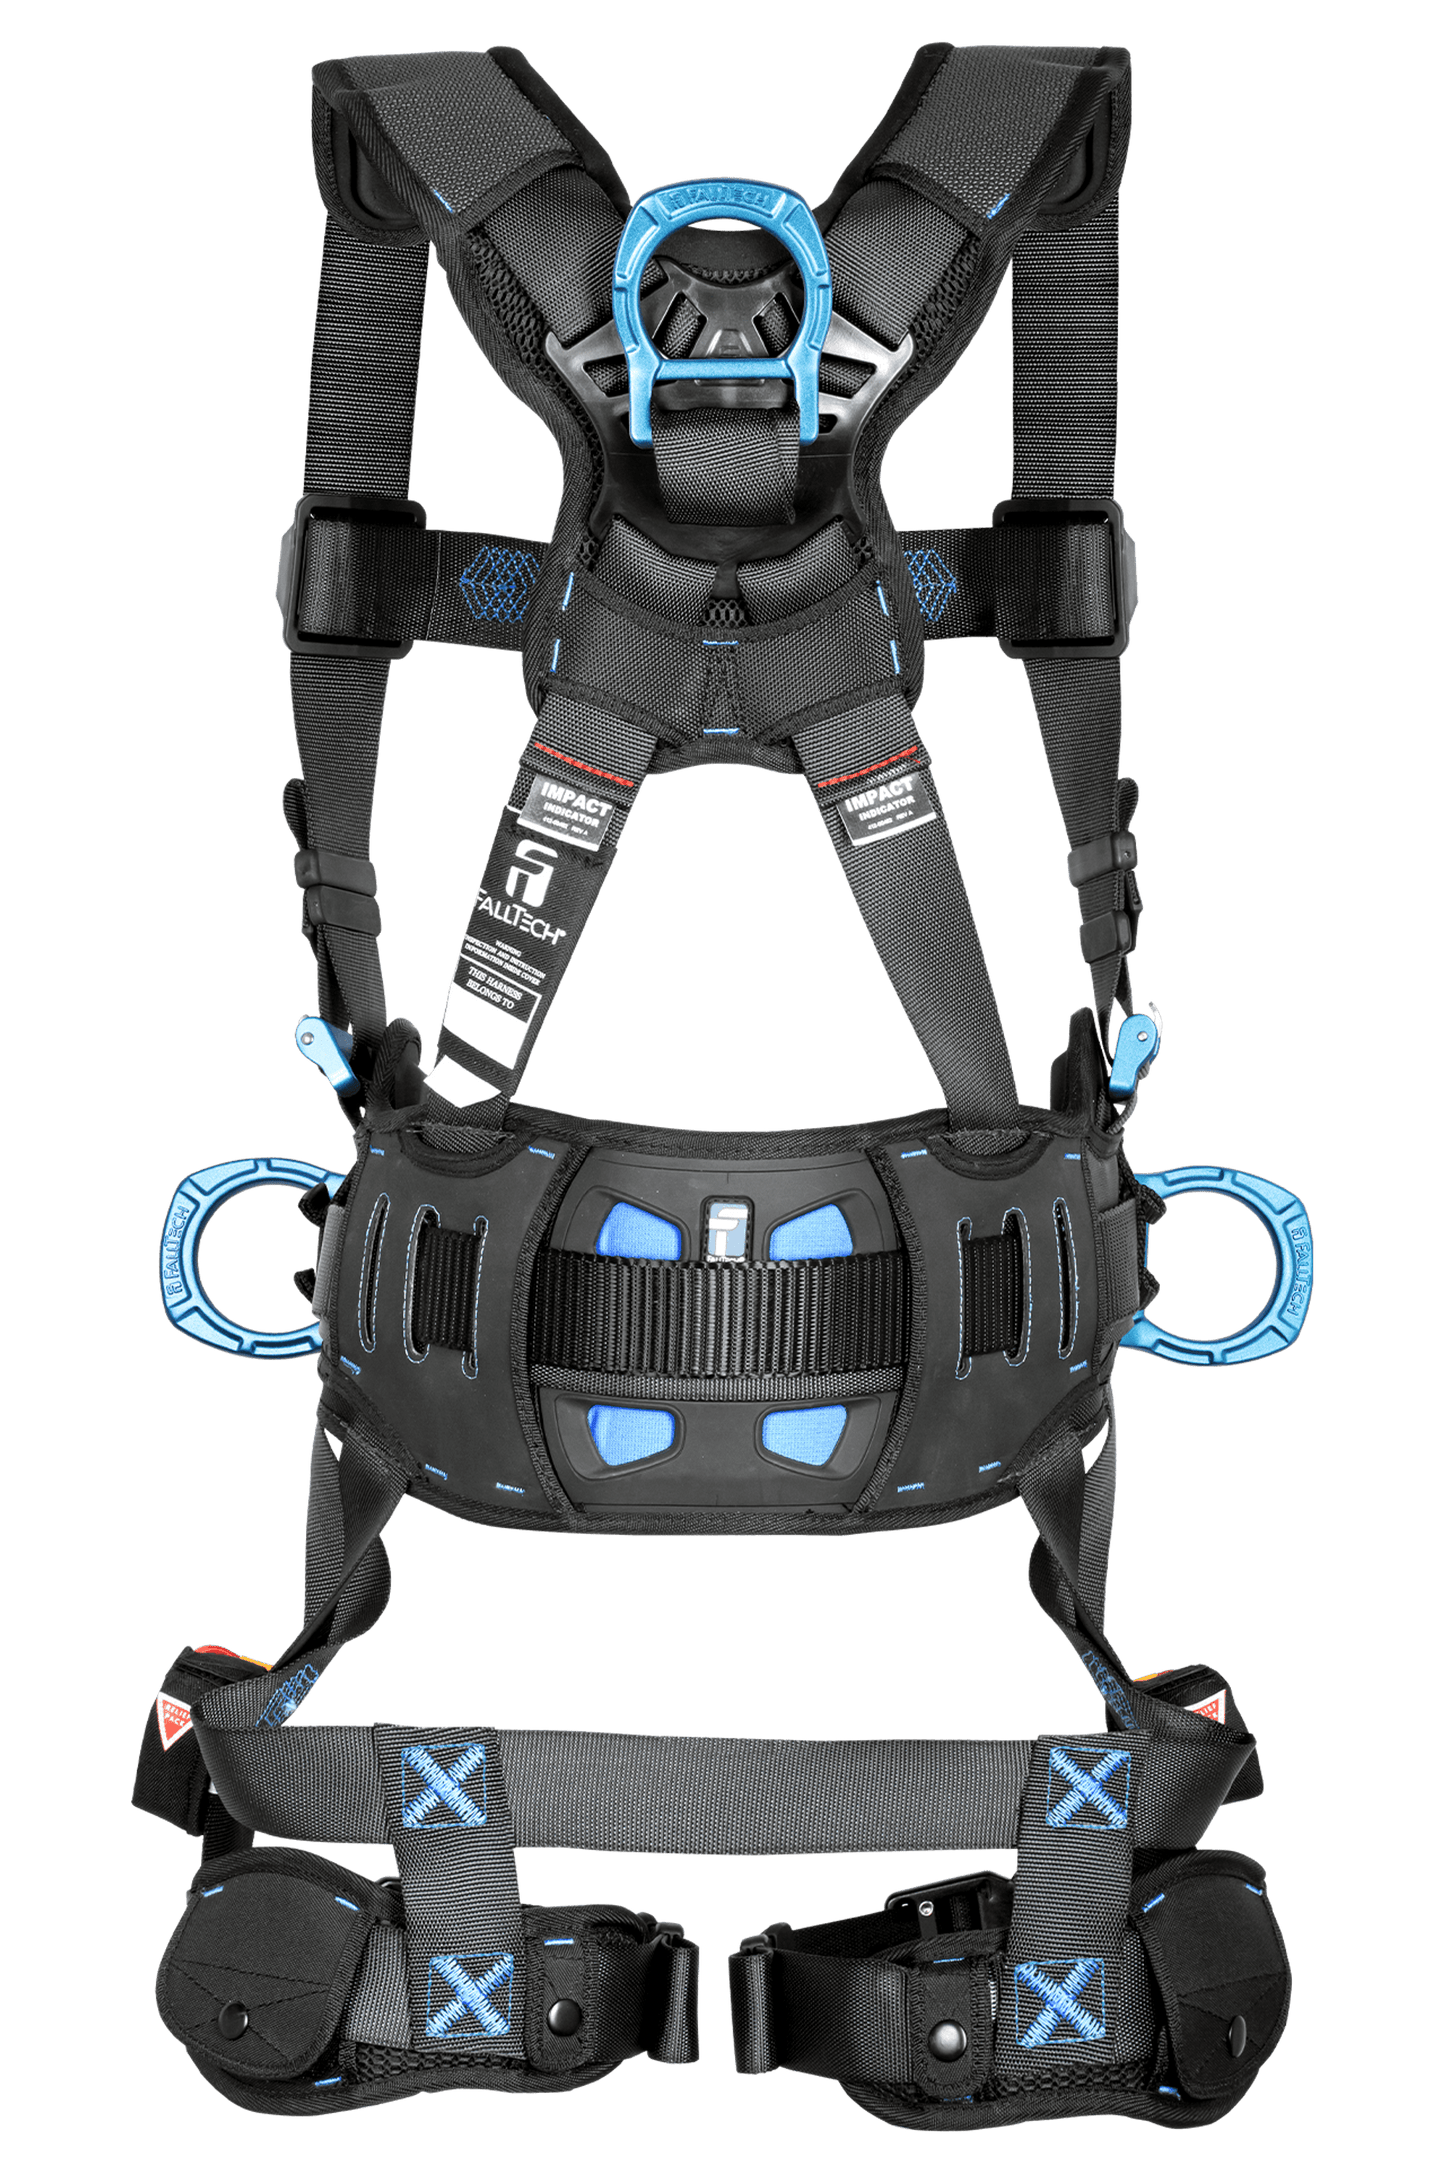 FT-One Full Body Safety Harness With Tool Belt, Tongue Buckle Leg Adjustments